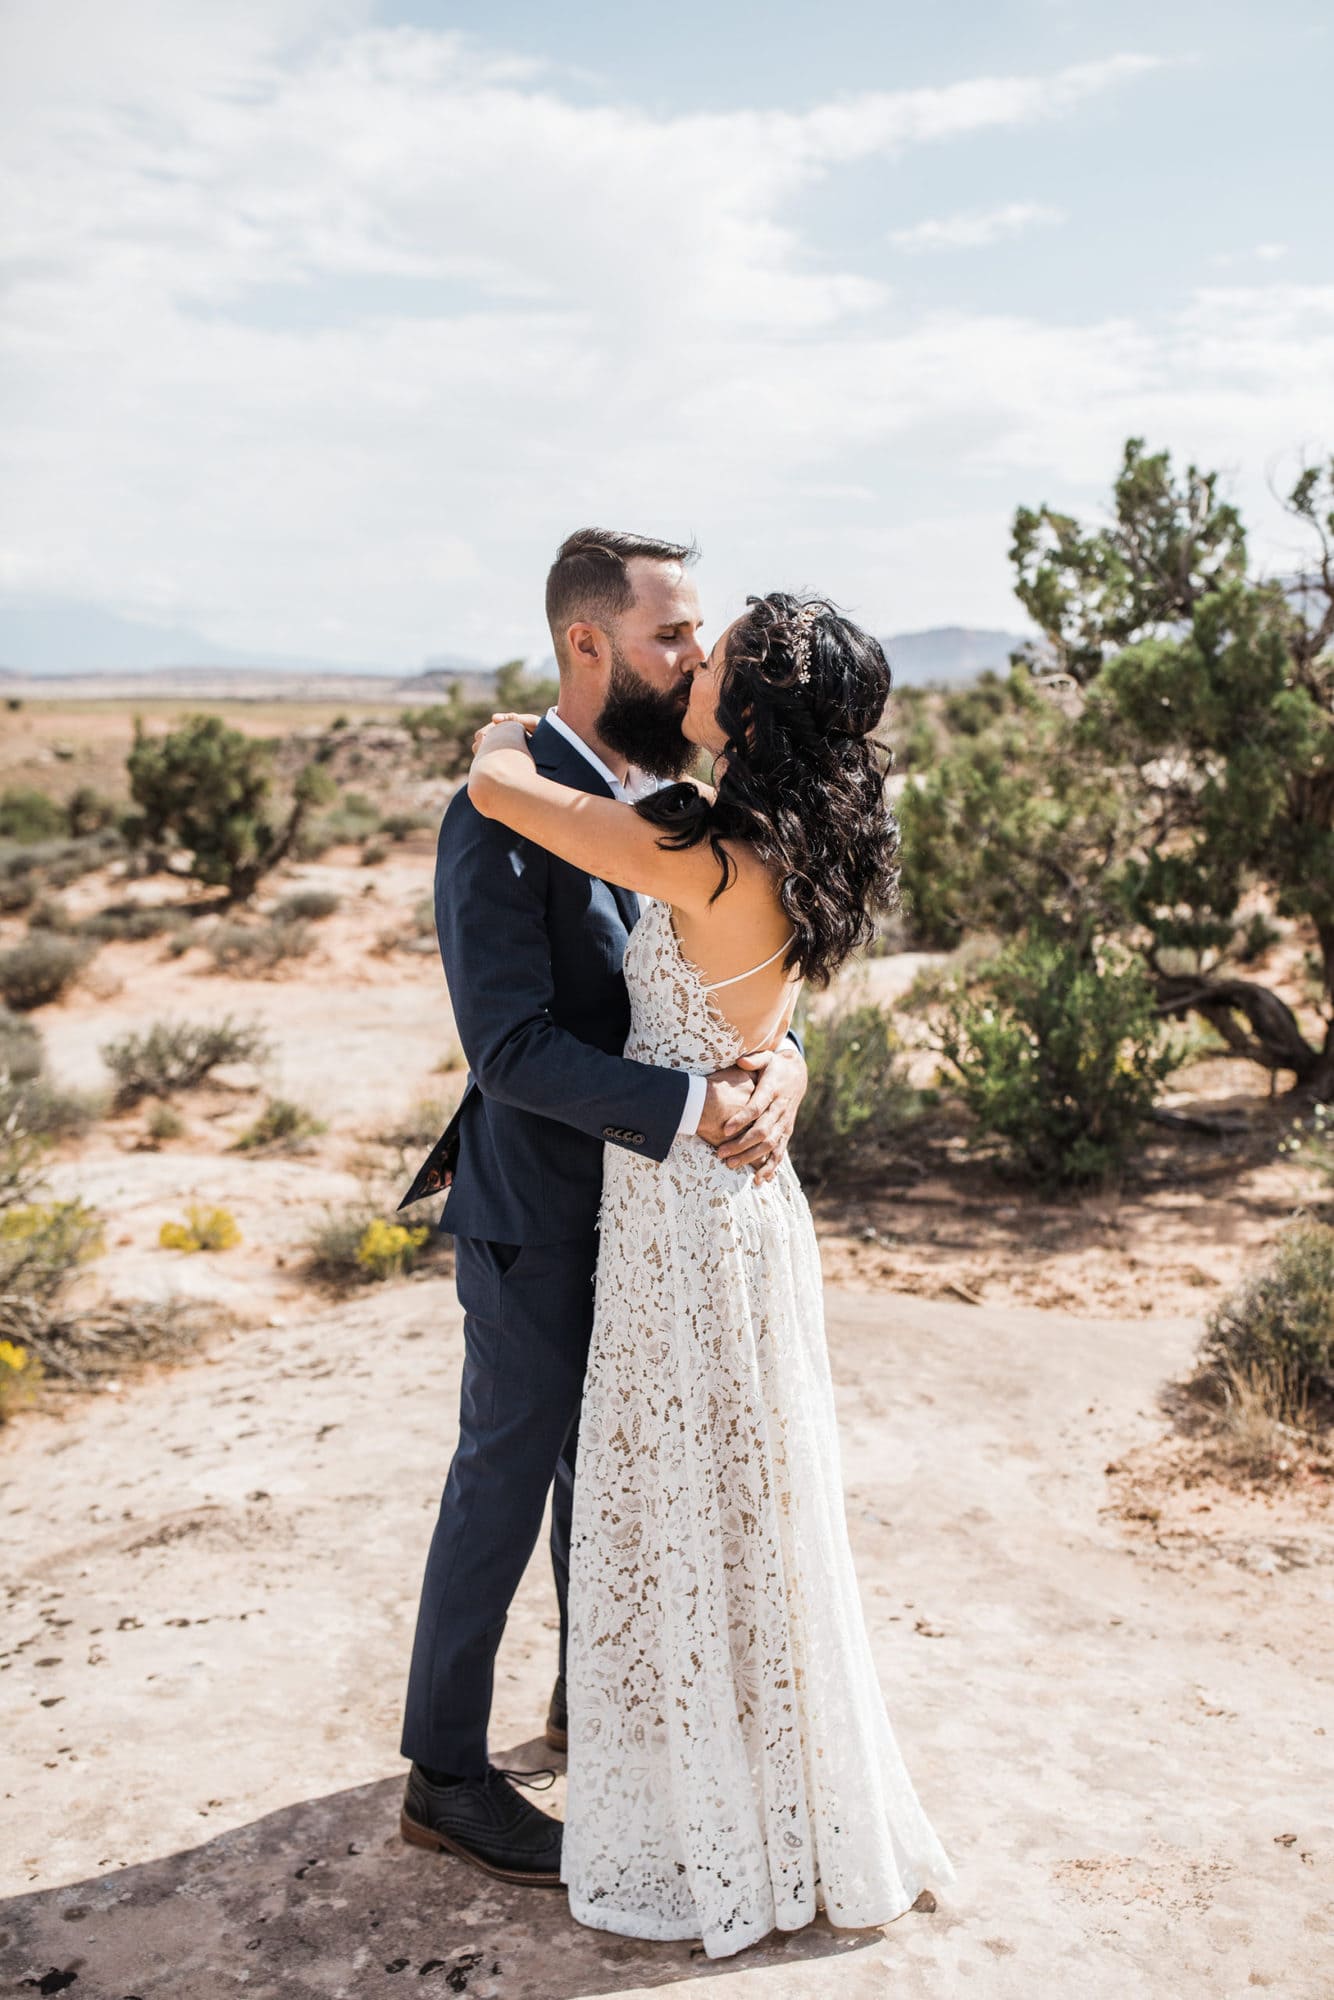 Talk about EPIC. This three day hiking elopement is the perfect balance of including family and not giving up adventure. This one isn't to be missed!